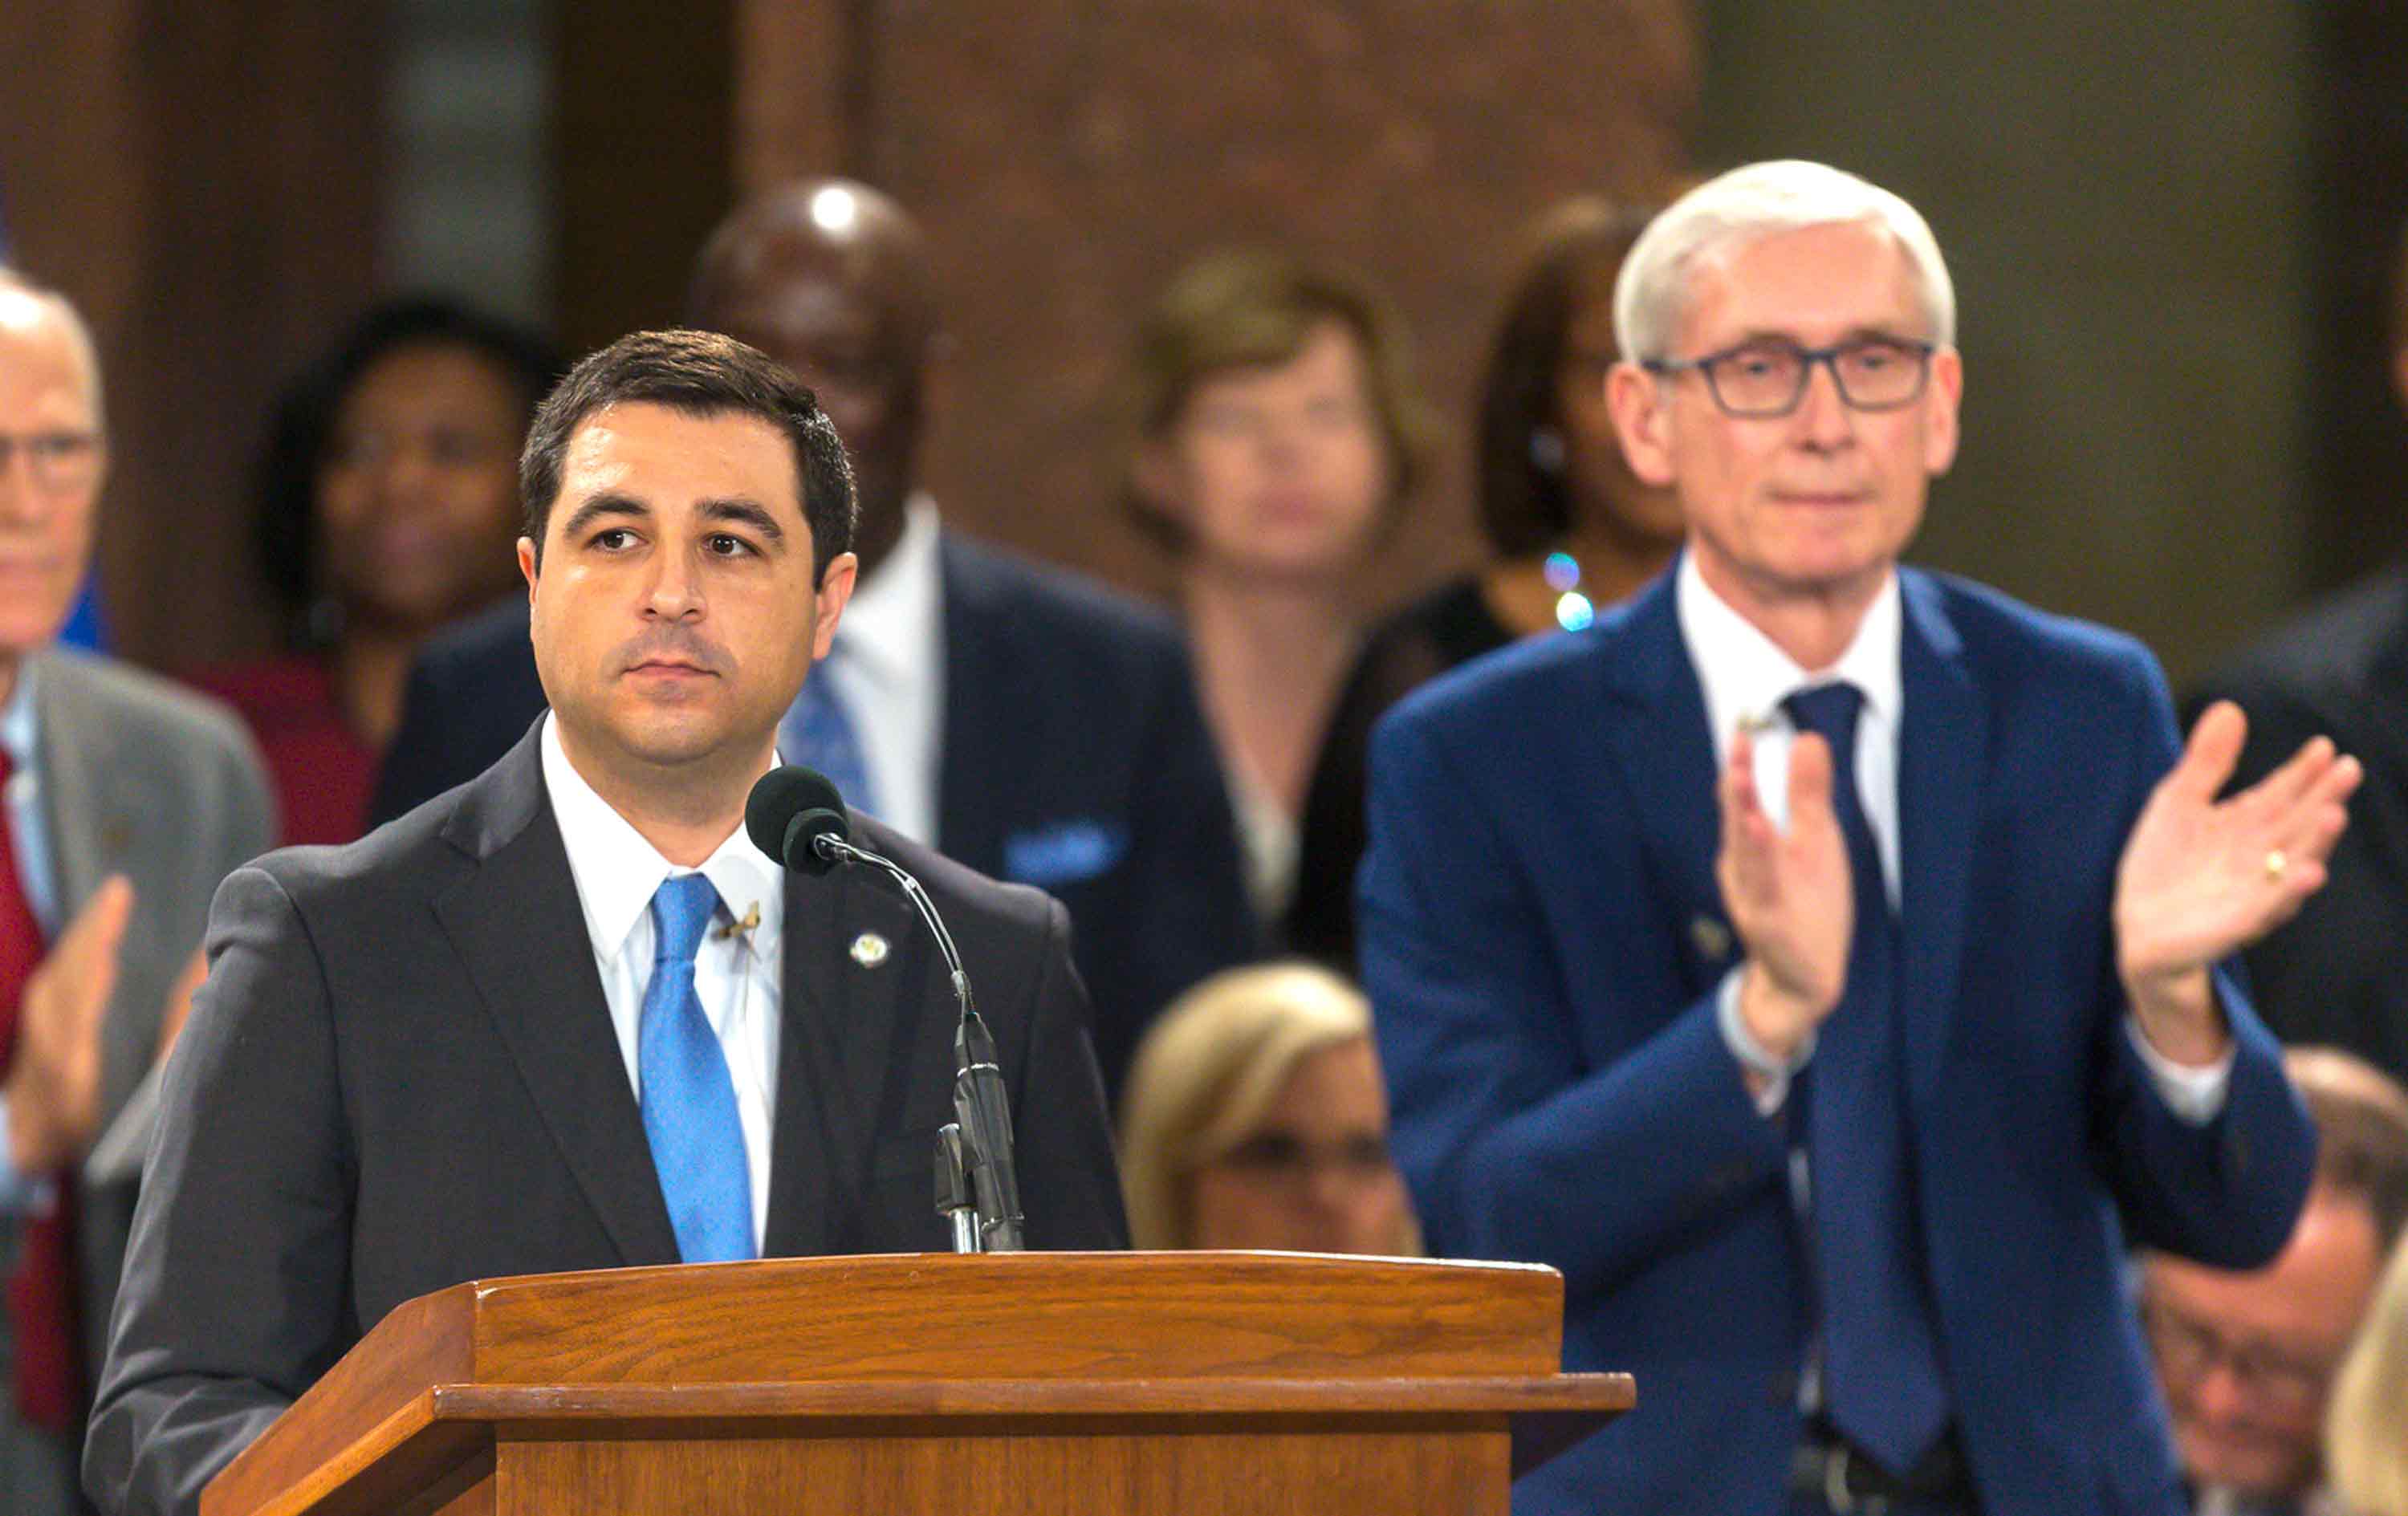 A Wisconsin Judge Upends the GOP Power Grab and Restores the Authority of the Democratic Governor